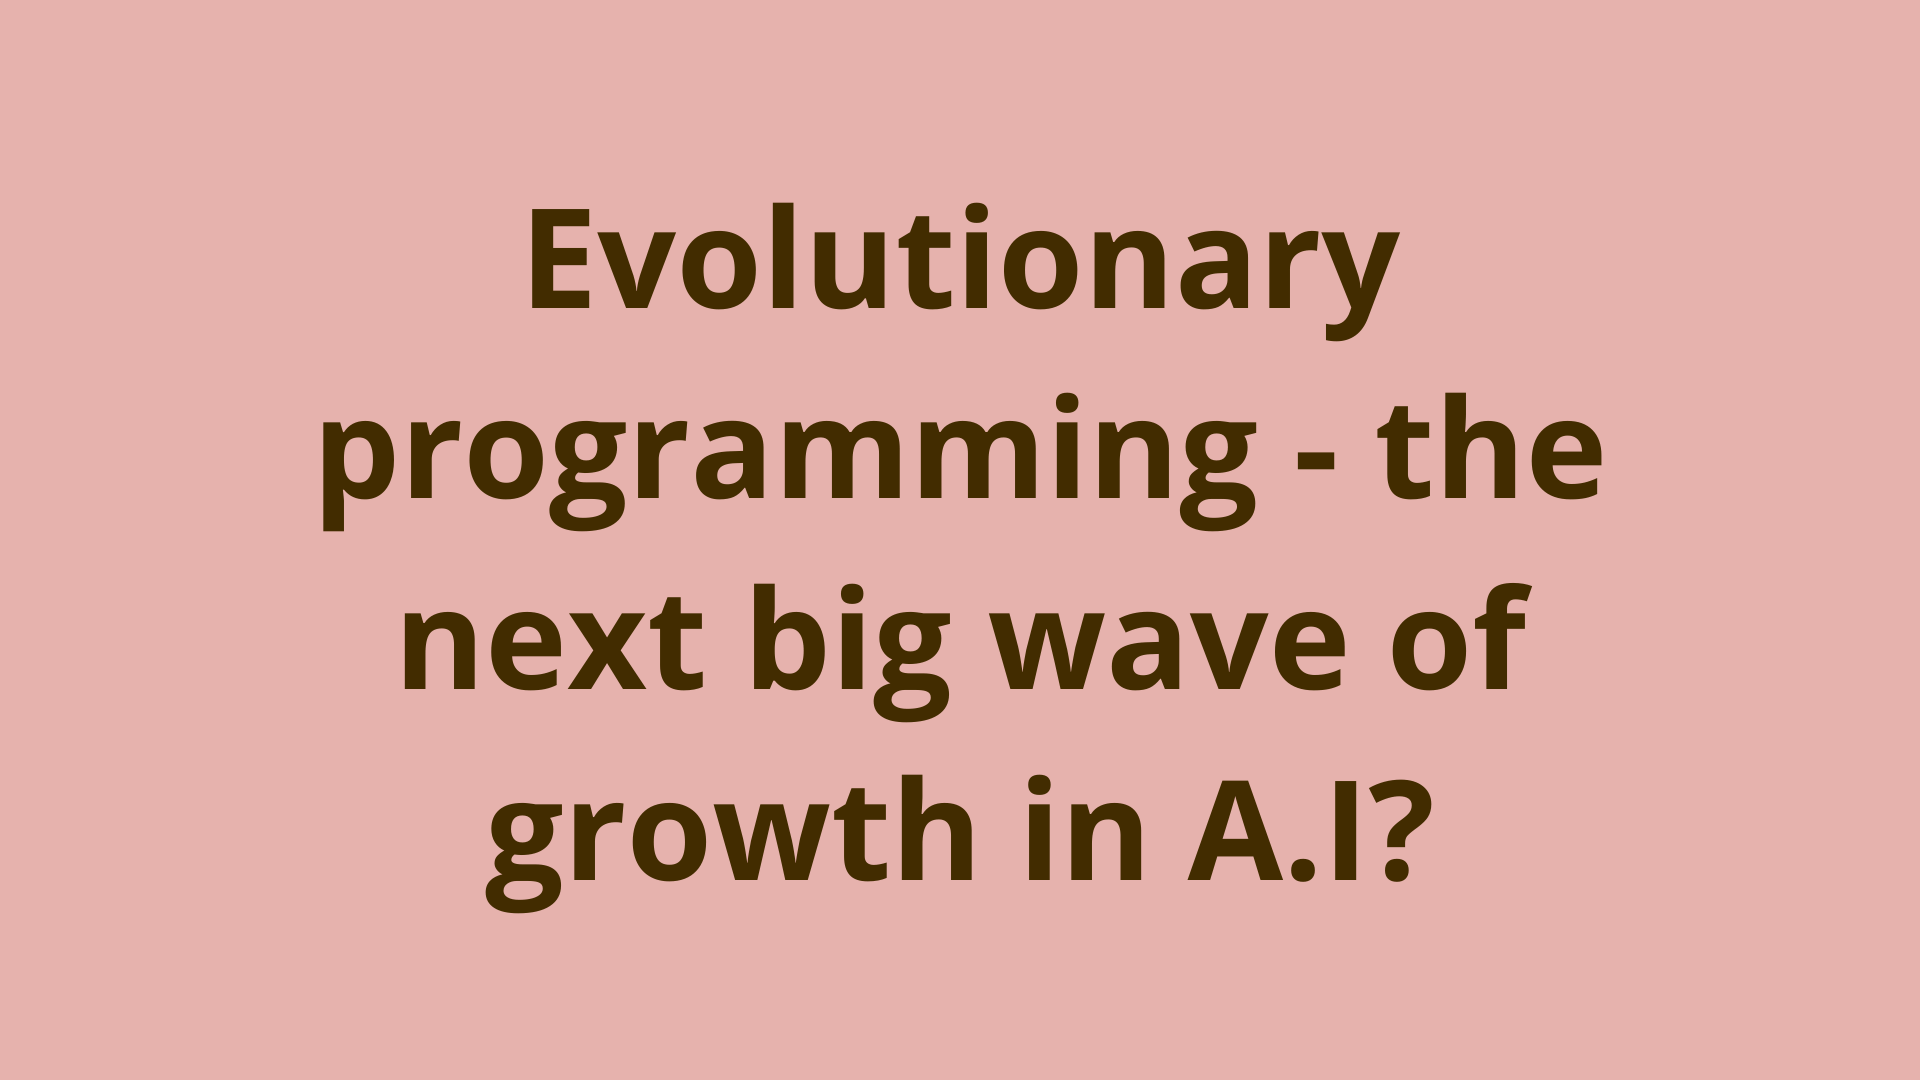 Image of Evolutionary programming - the next big wave of growth in A.I?